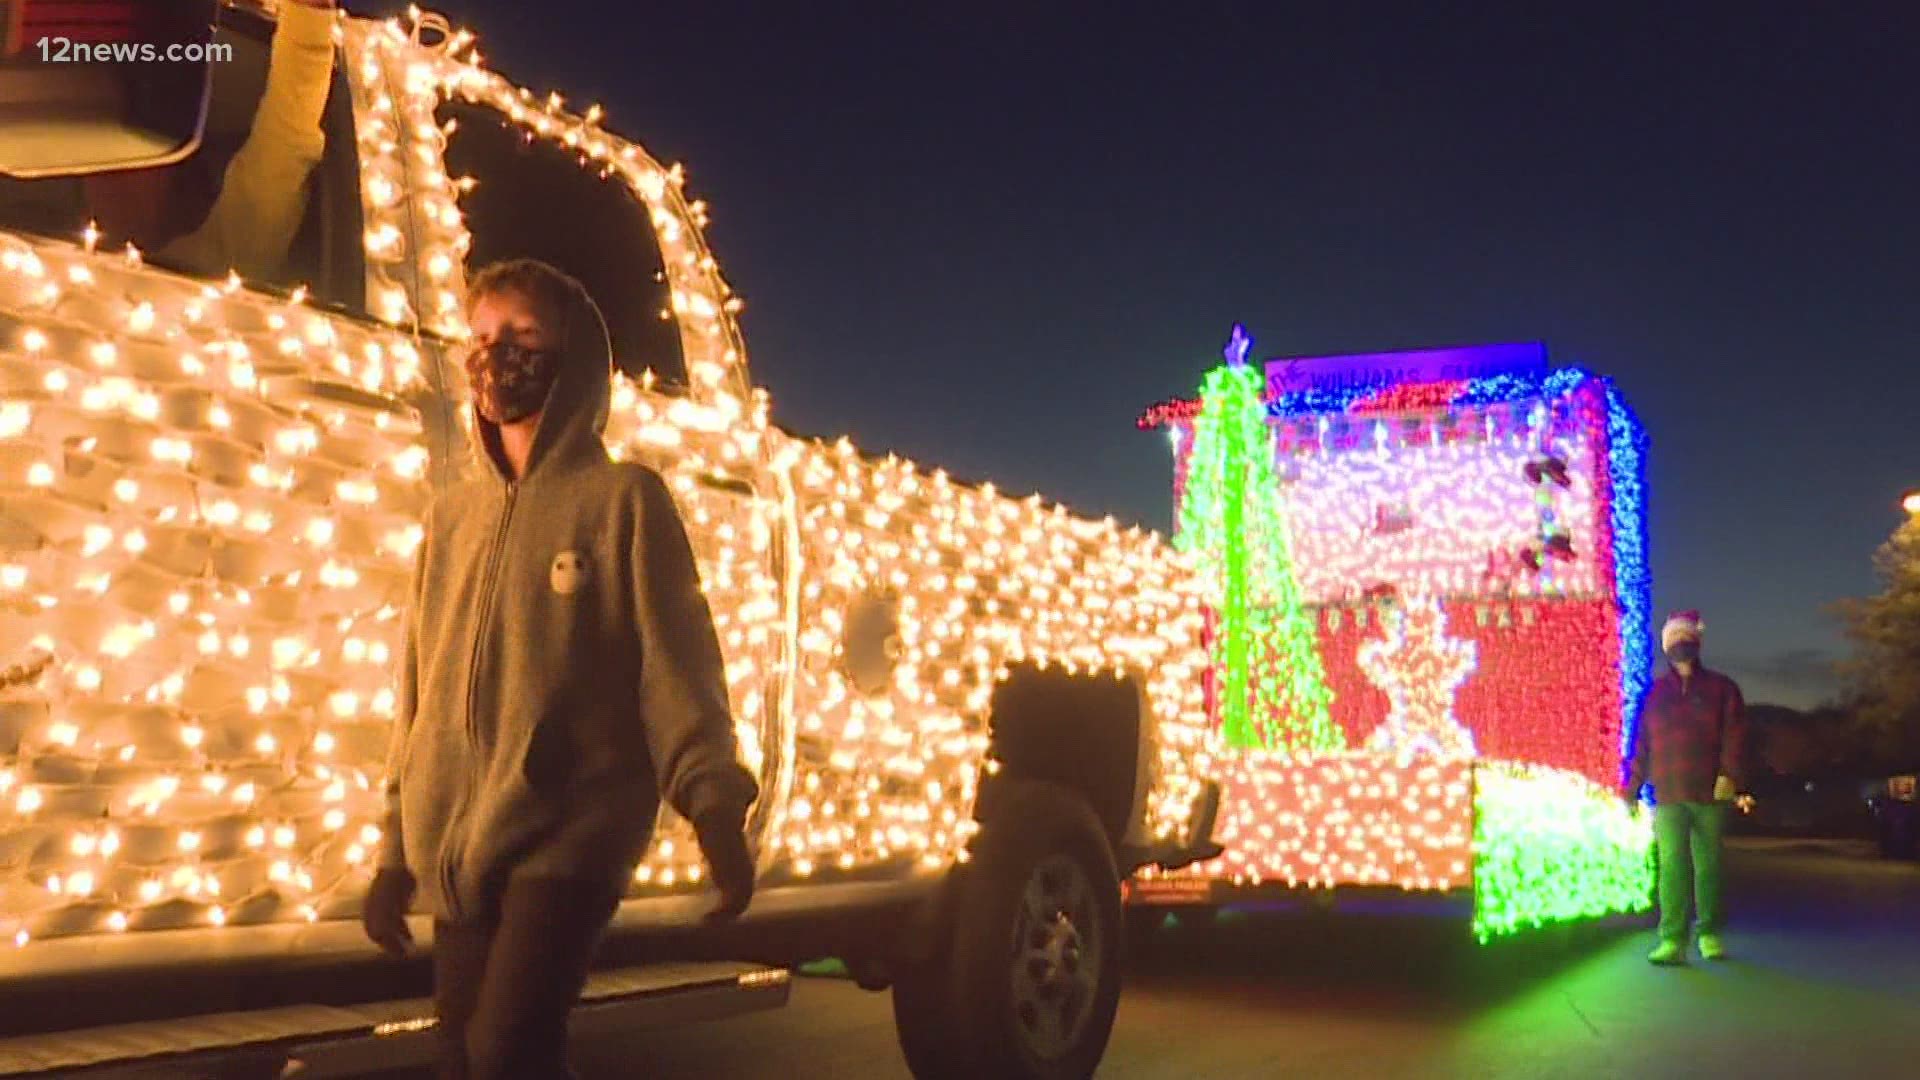 One Valley family isn't letting COVID dampen their holiday plans. If you can't attend the Electric Light Parade, they're going to bring the parade to you.